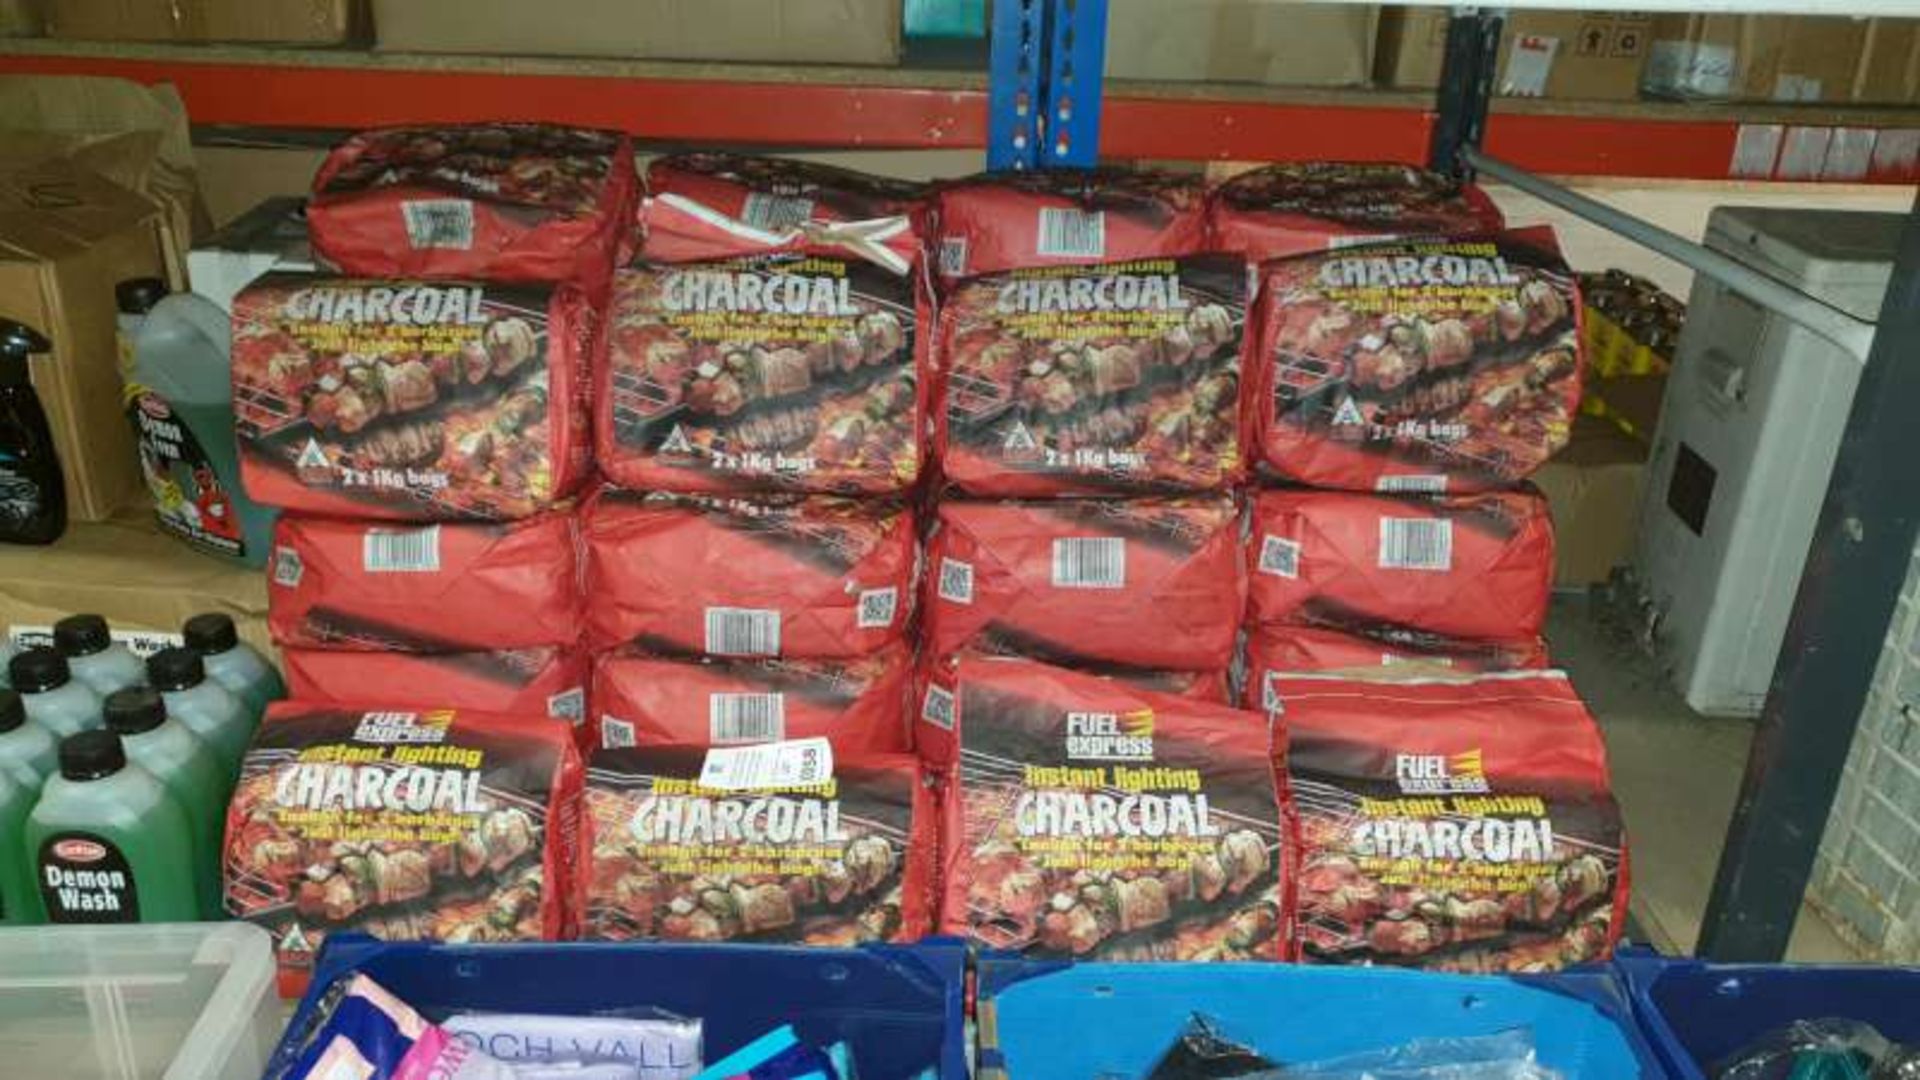 LOT CONTAINING APPROX 65, 2 X 1KG FUEL EXPRESS INSTANT LIGHTING CHARCOAL